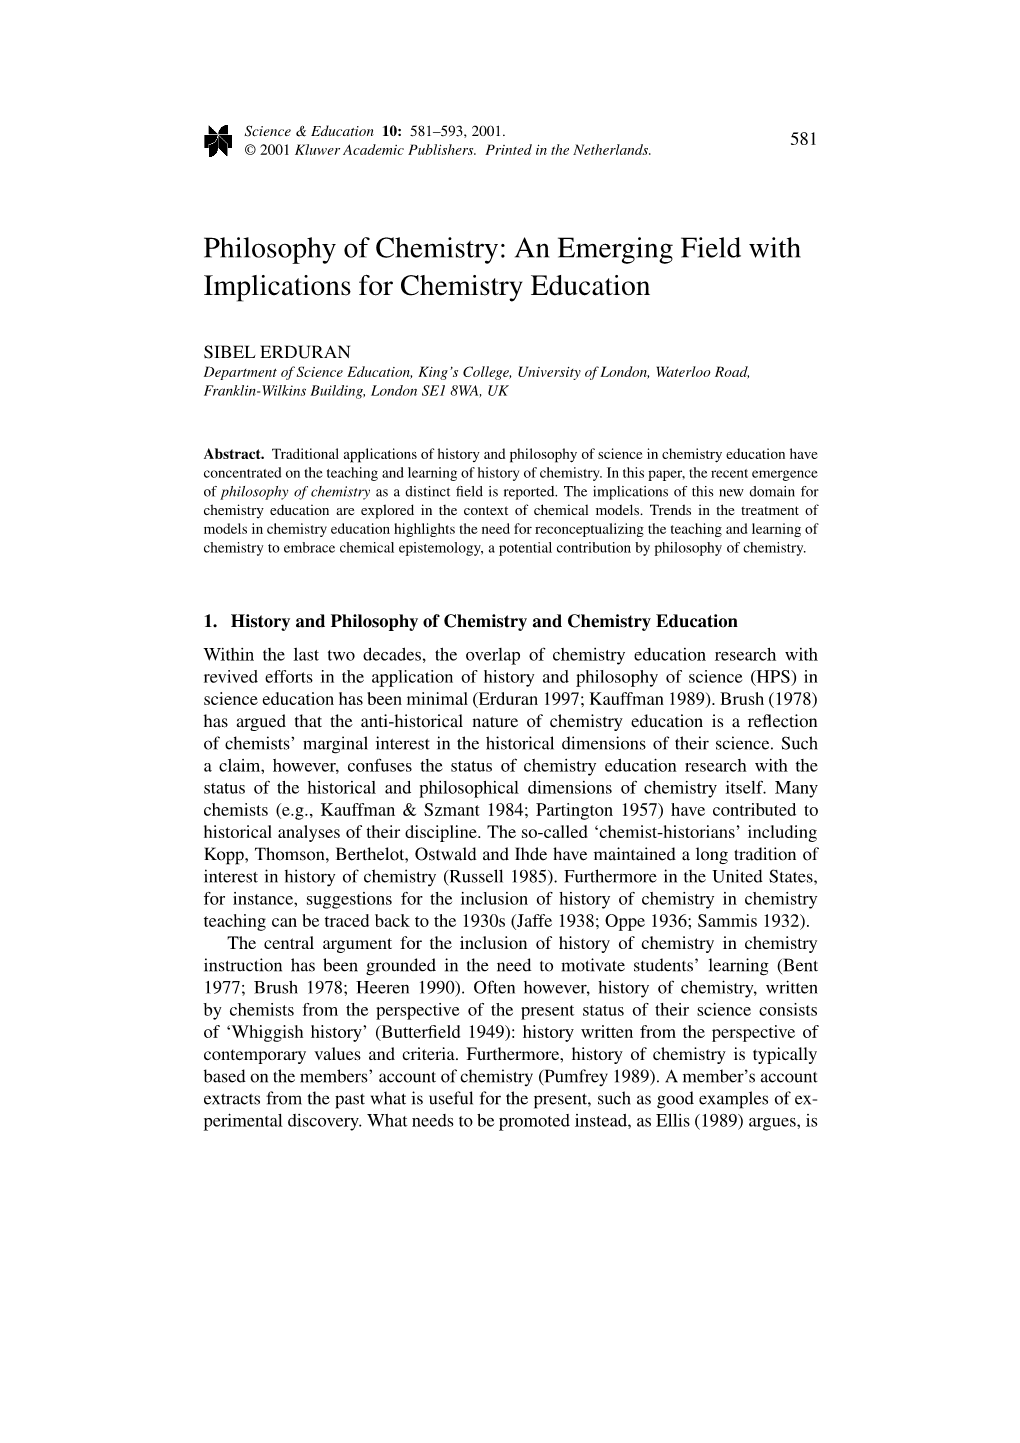 Philosophy of Chemistry: an Emerging Field with Implications for Chemistry Education